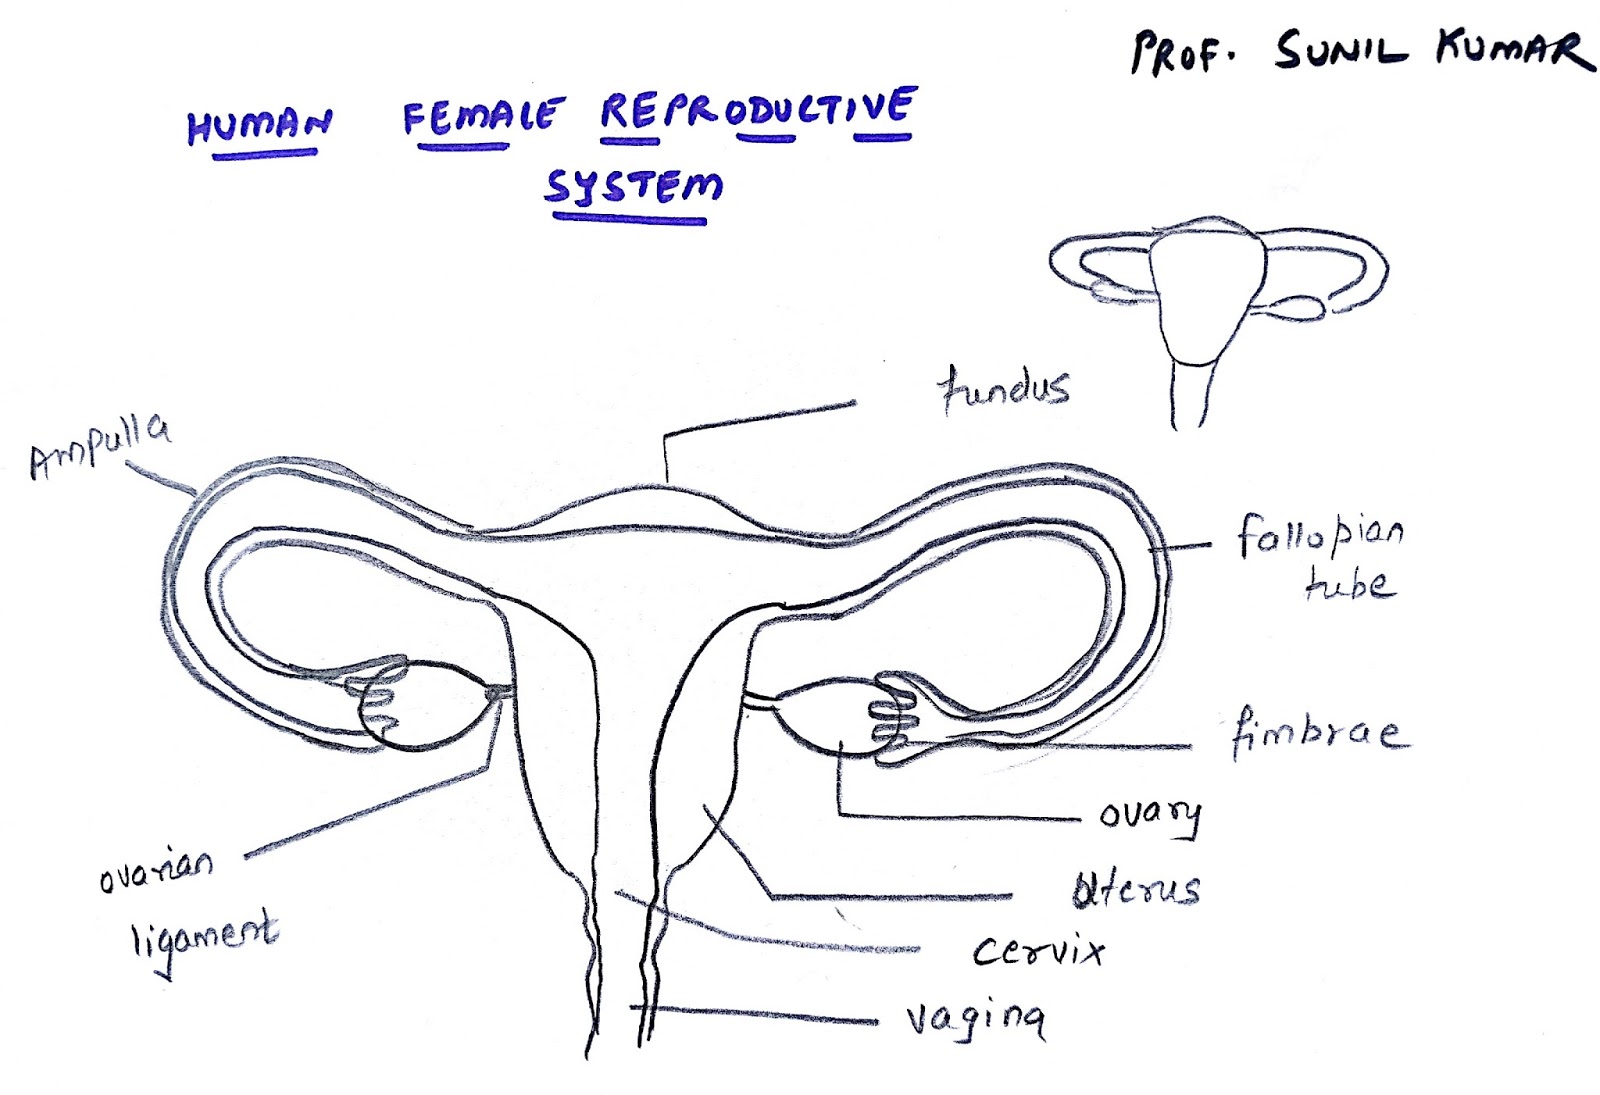 Female Reproductive System: Structure & Function